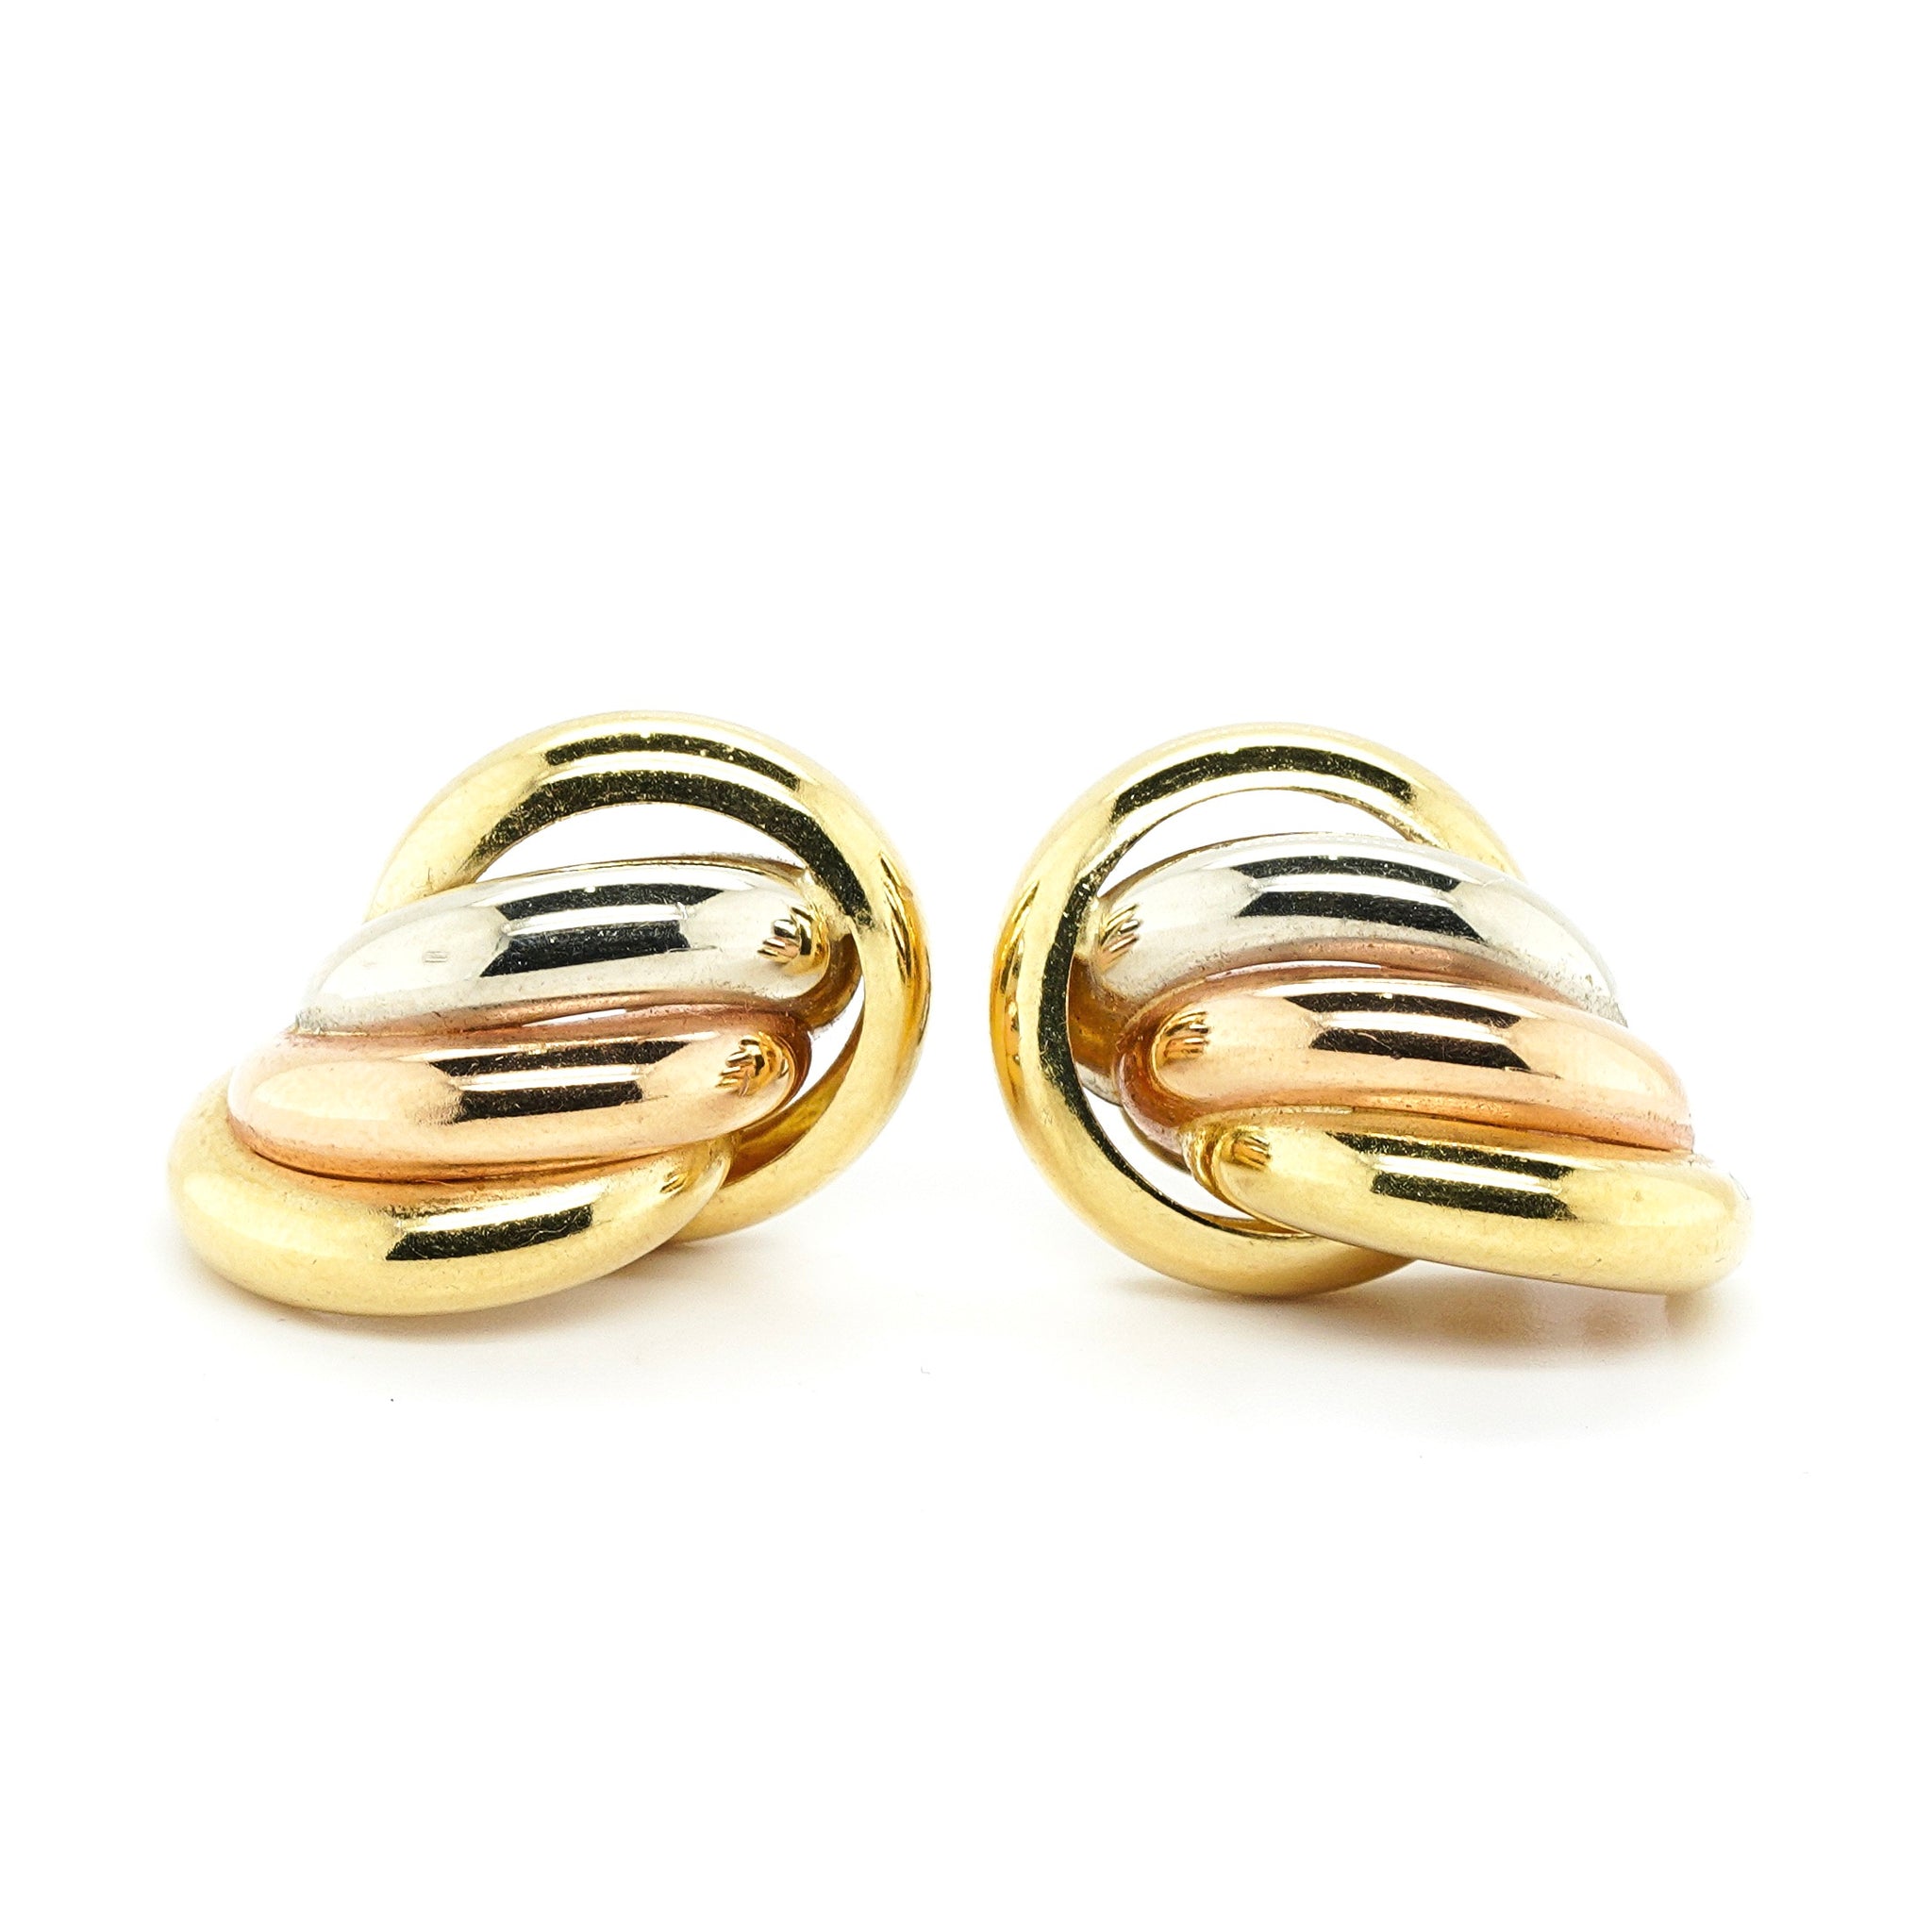 Vintage Three Colour Gold Earrings